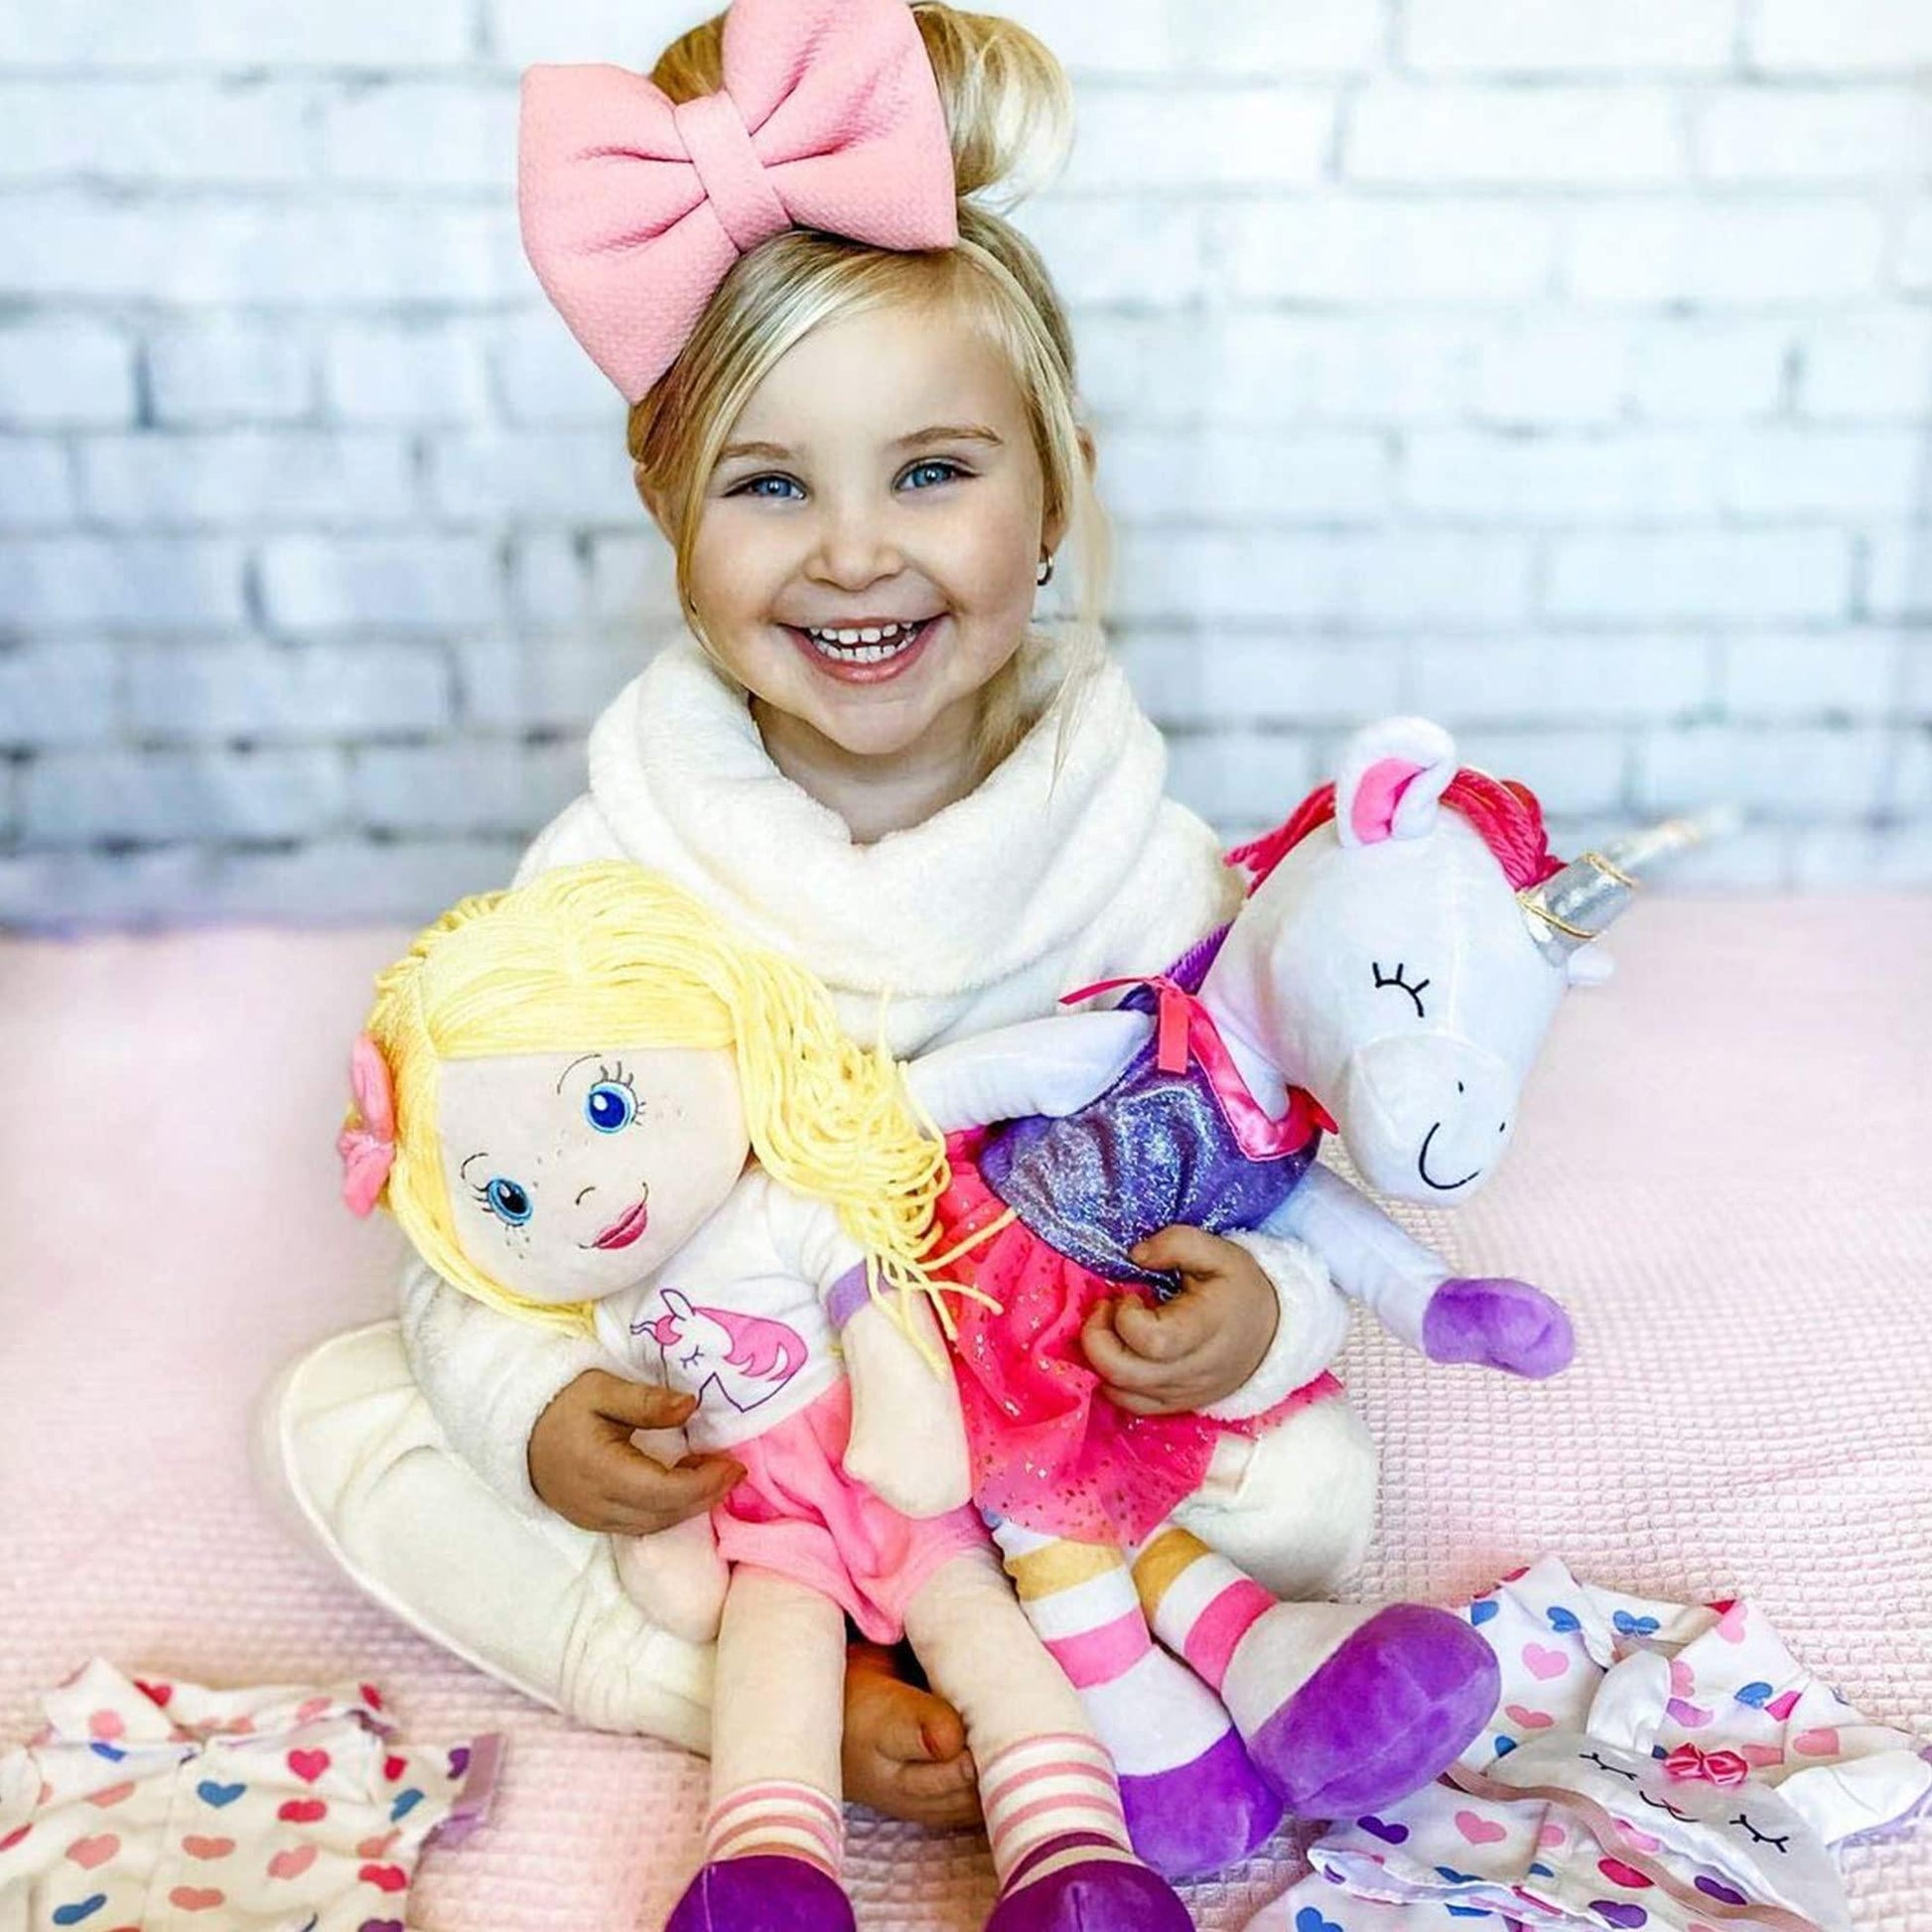 Plushible Soft Baby Doll 18 Inch Rag Dolls for Girls Infants Babies My First Plush for 1 Year Old Blonde Yarn Hair Girl Toys Eimmie - Loomini